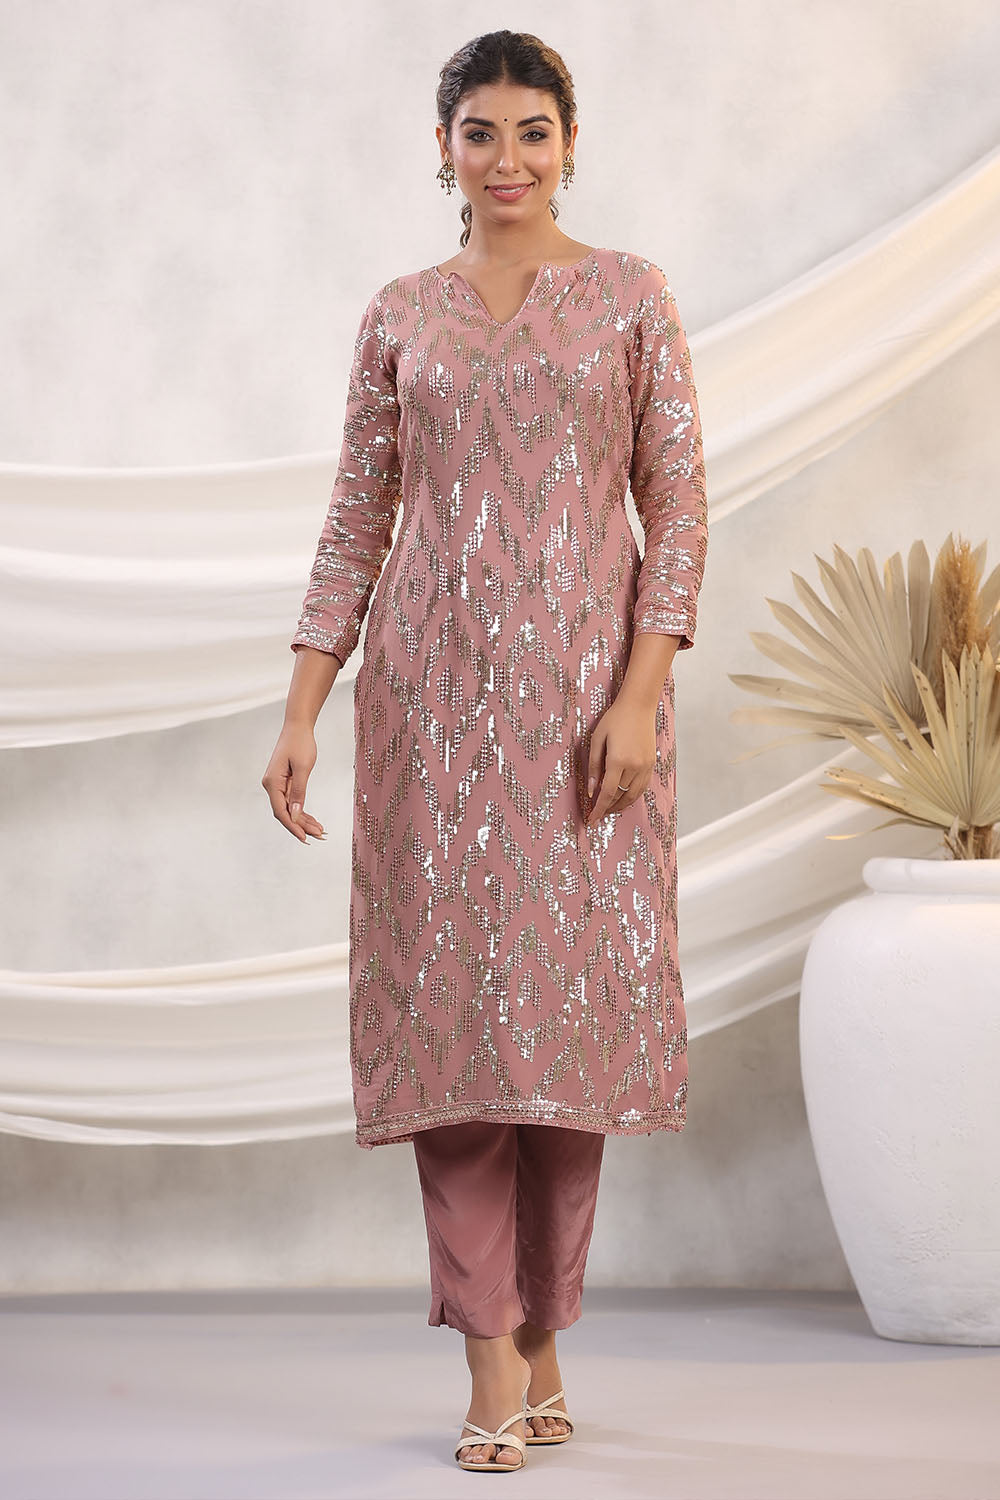 Dusty Pink Color Embroidered Georgette Unstitched Suit Material